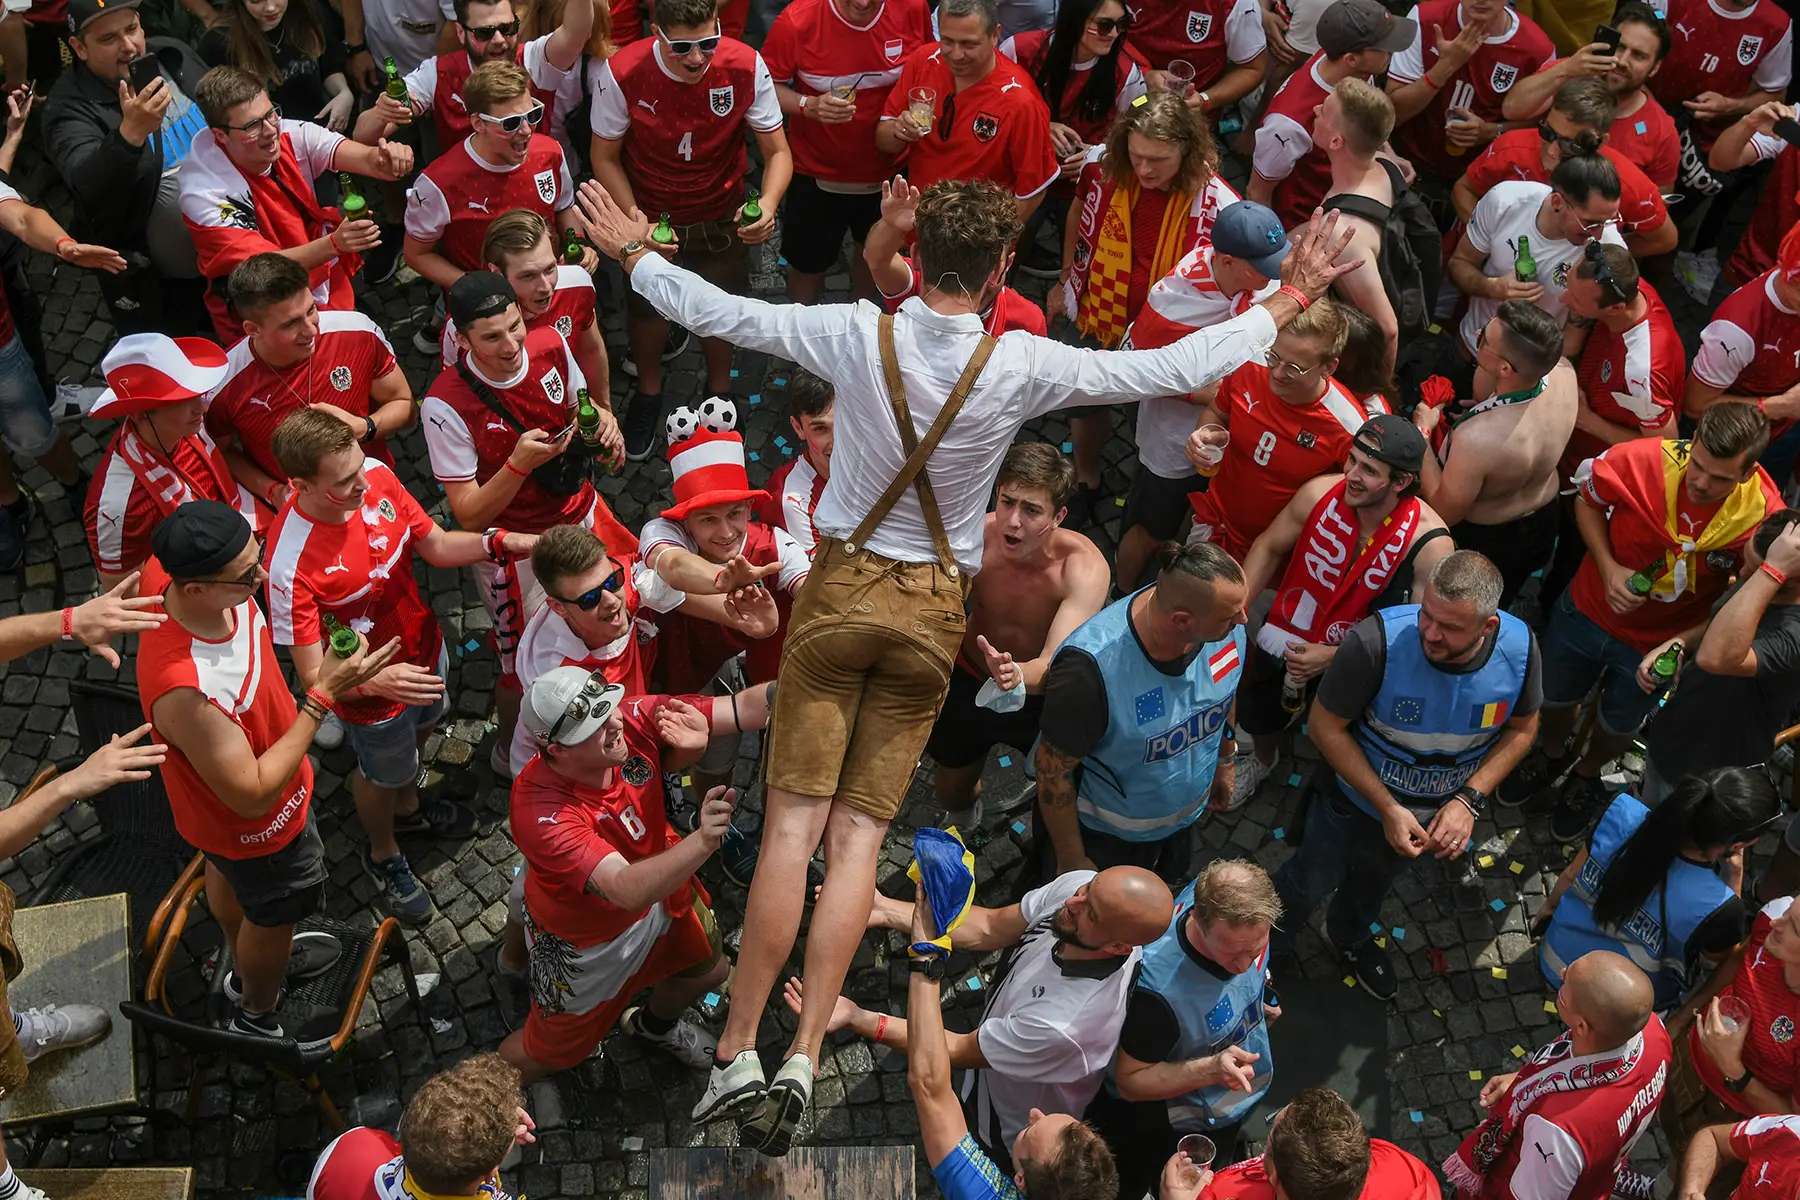 Austrian football supporters having a small celebration